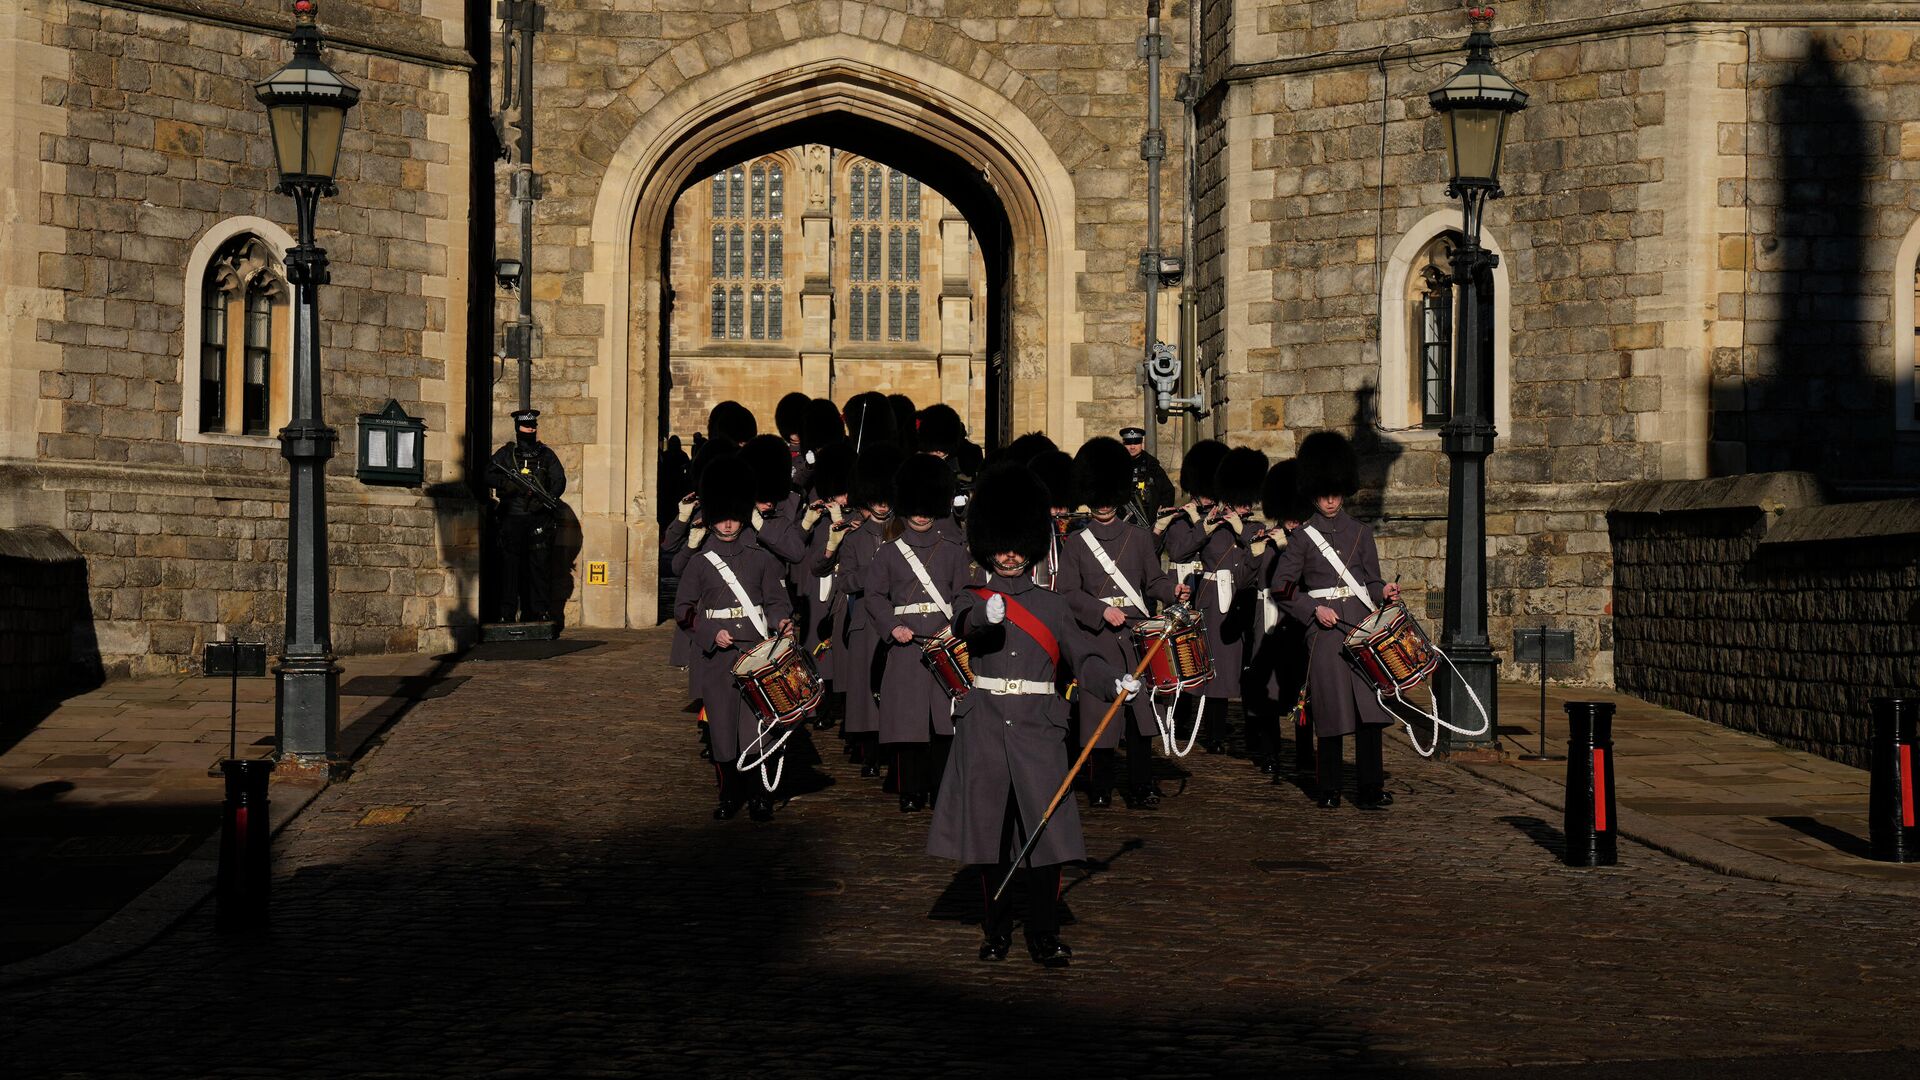 Members of the British Military's 1st Battalion Grenadier Guards Corps of Drums take part in the changing of the guard ceremony outside Windsor Castle in Windsor, England, where Prince Andrew's residence is nearby in the grounds of Windsor Great Park, Thursday, Jan. 13, 2022 - Sputnik International, 1920, 23.01.2022